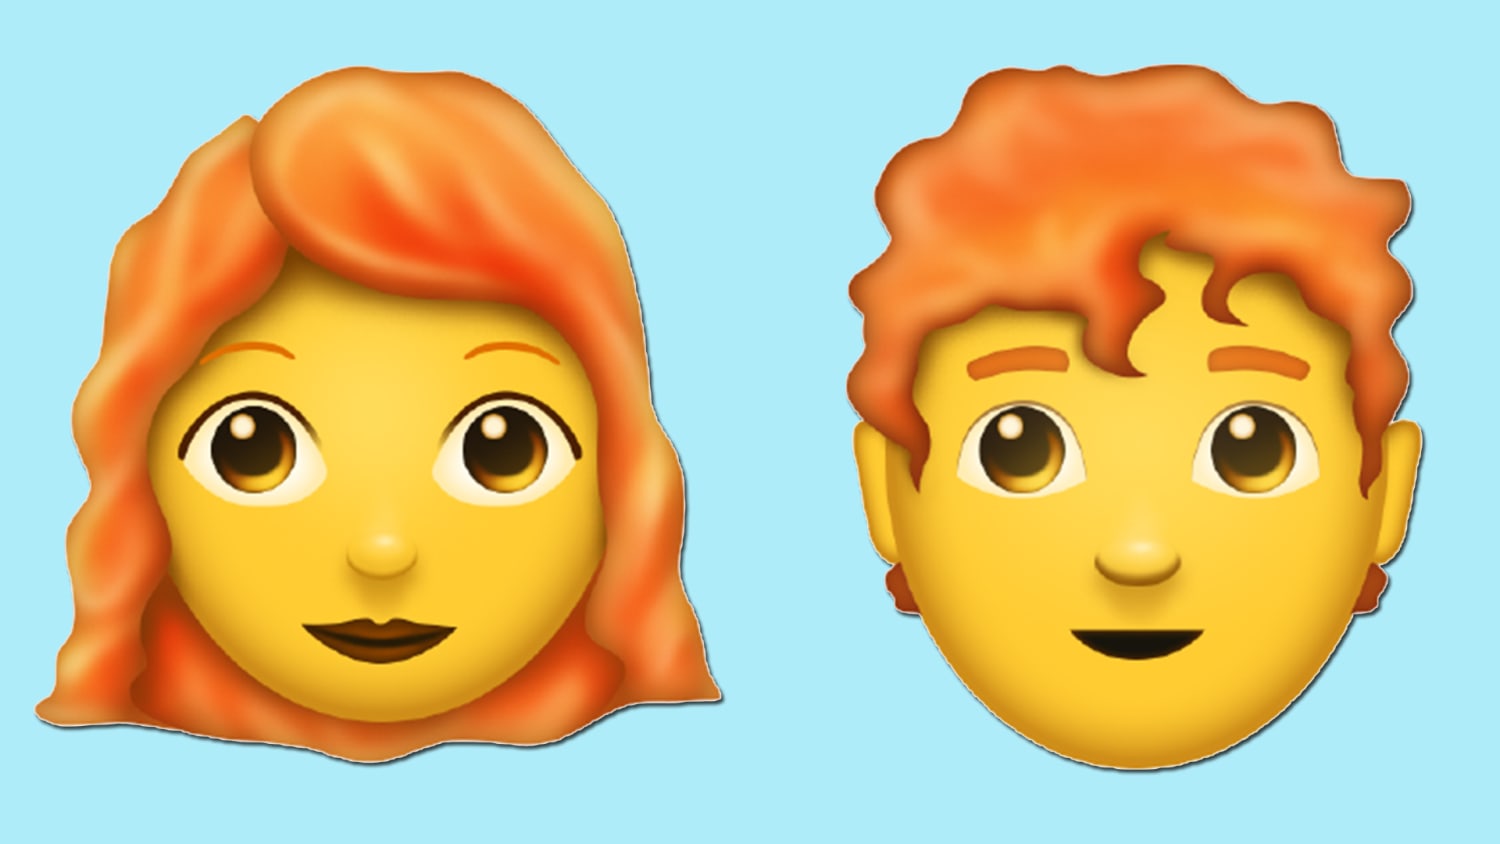 New redhead emojis arrive, along with unique hair